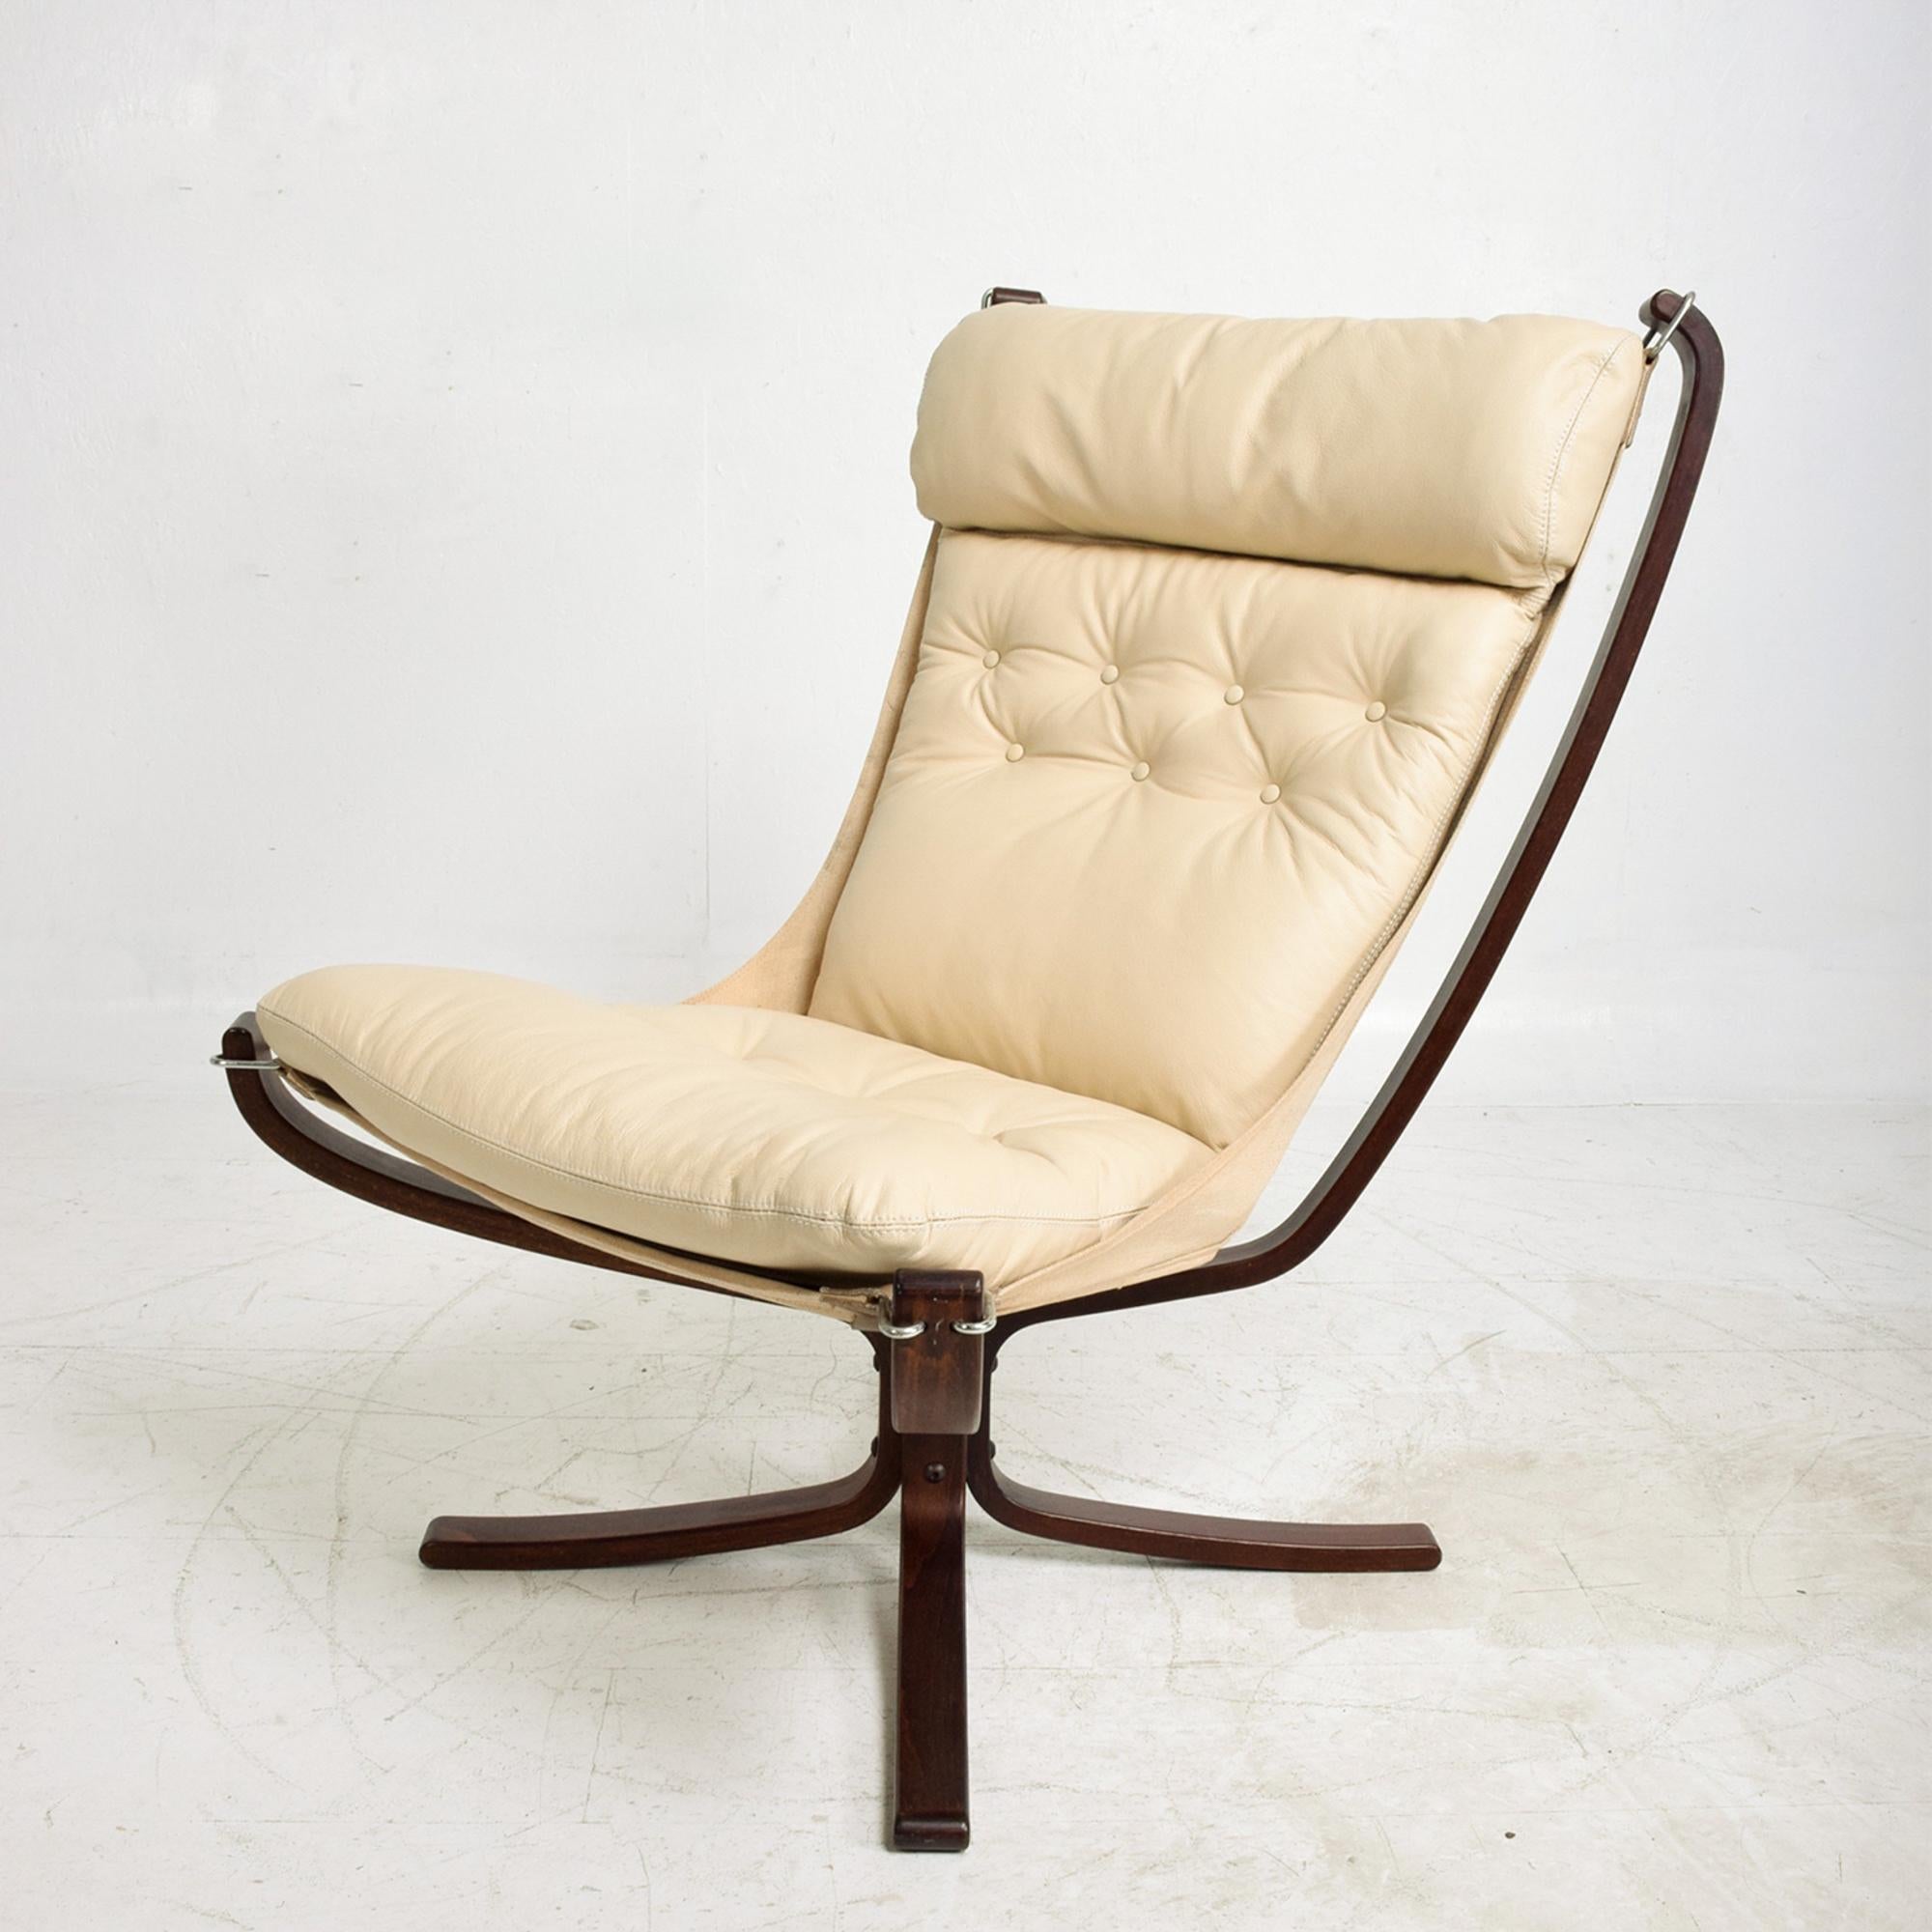 Scandinavian vintage modern Falcon leather lounge chair in ivory by Vatne Mobler Midcentury, Norway, 1970s
Features bentwood legs in a sculptural shape with a dark rosewood stain. (Original). Canvas in sun faded age. New leather cushion in